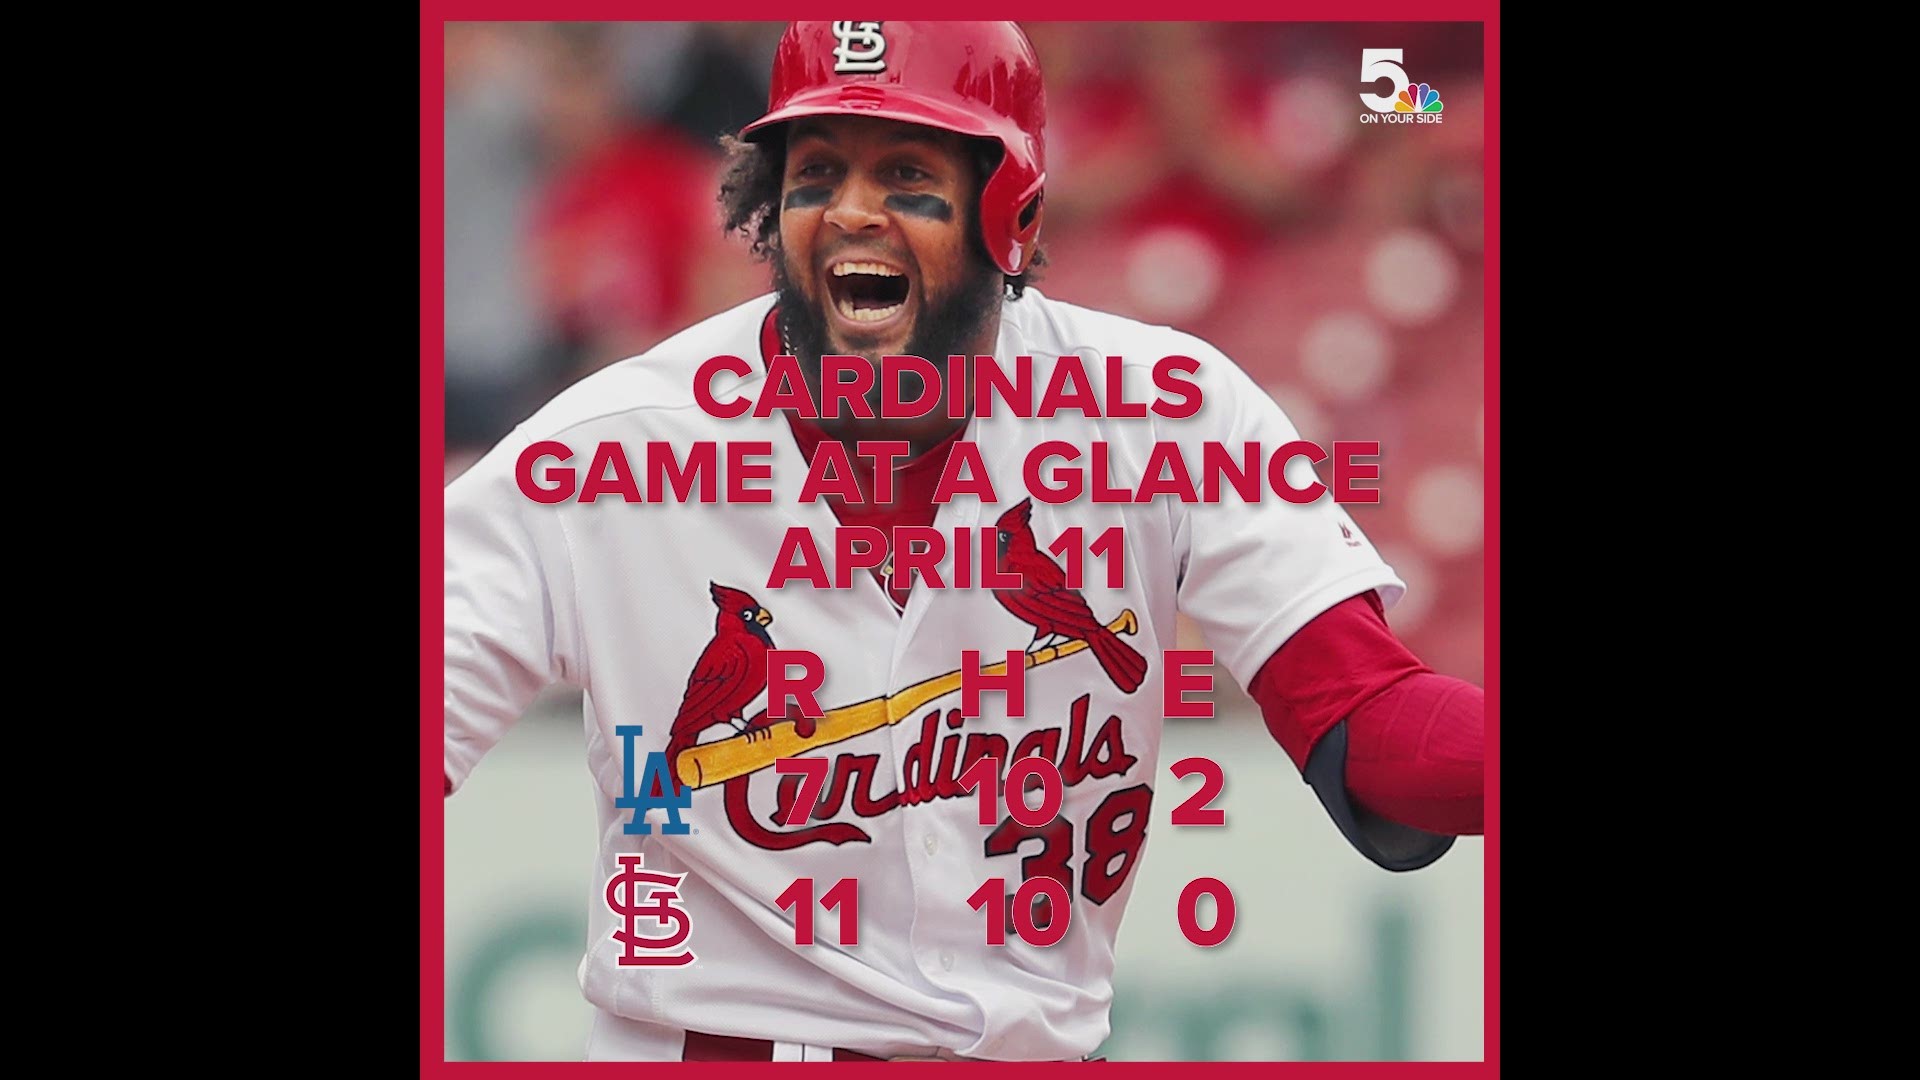 The Cardinals completed the sweep over the juggernaut Dodgers.